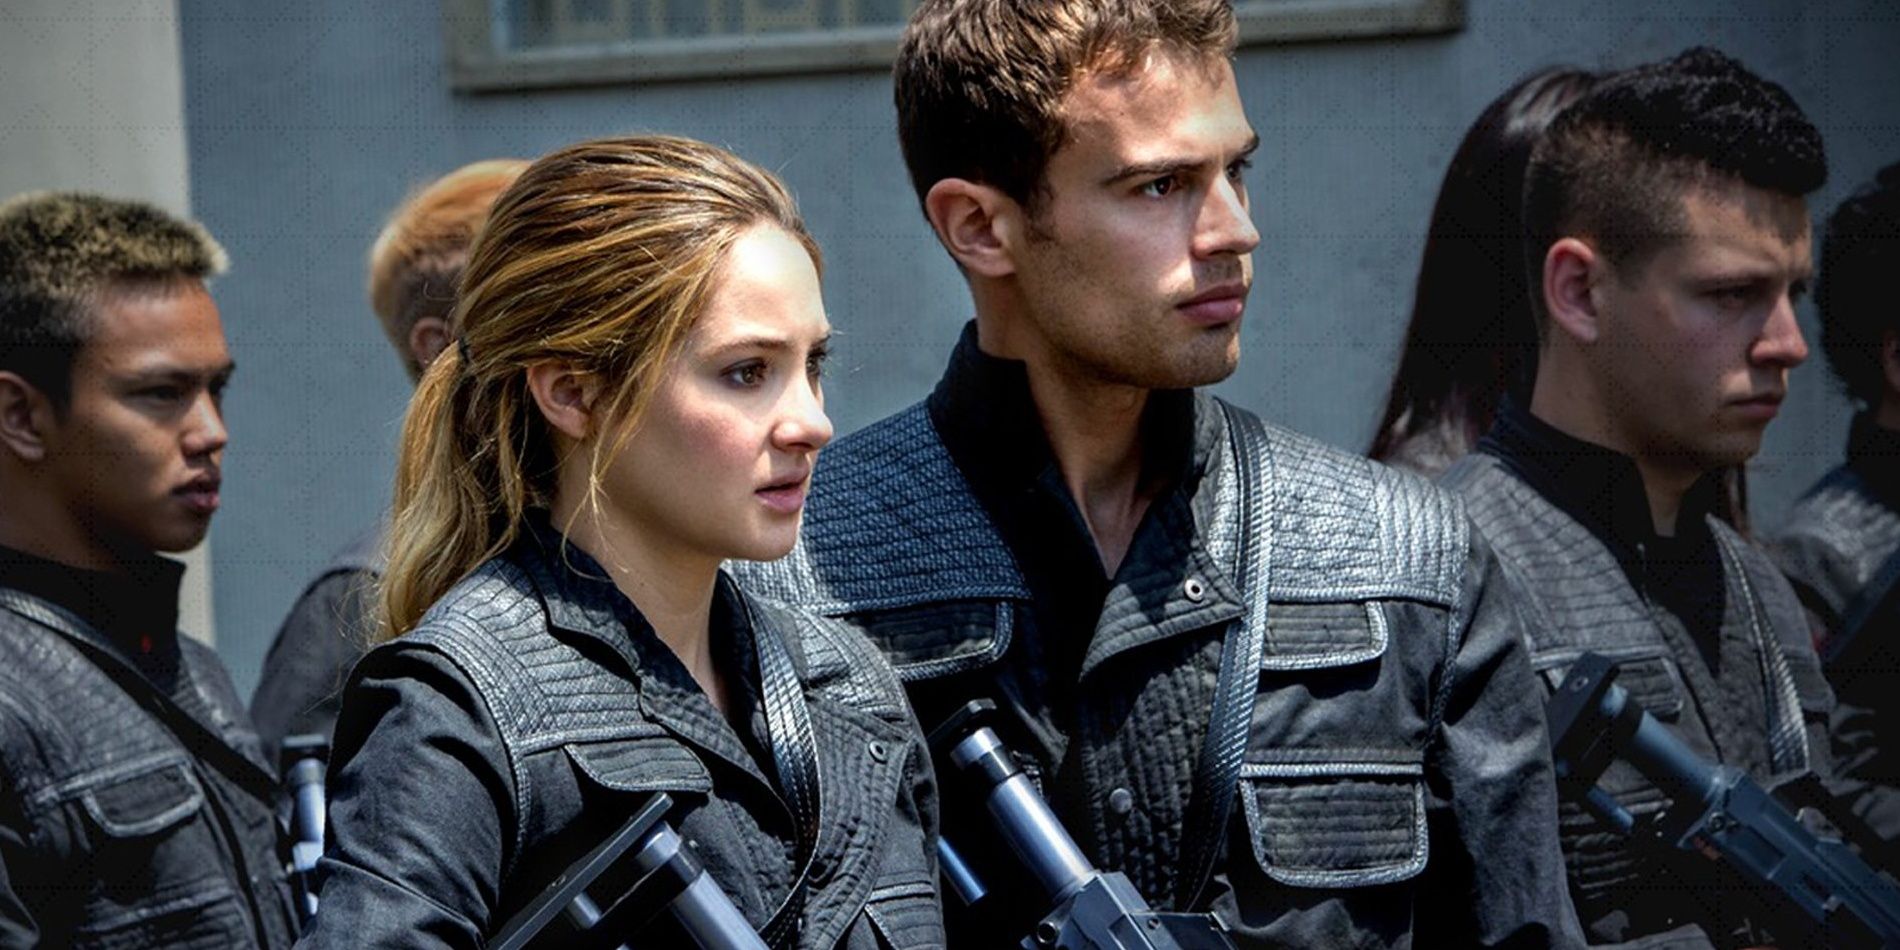 The cast of Divergent in tactical gear